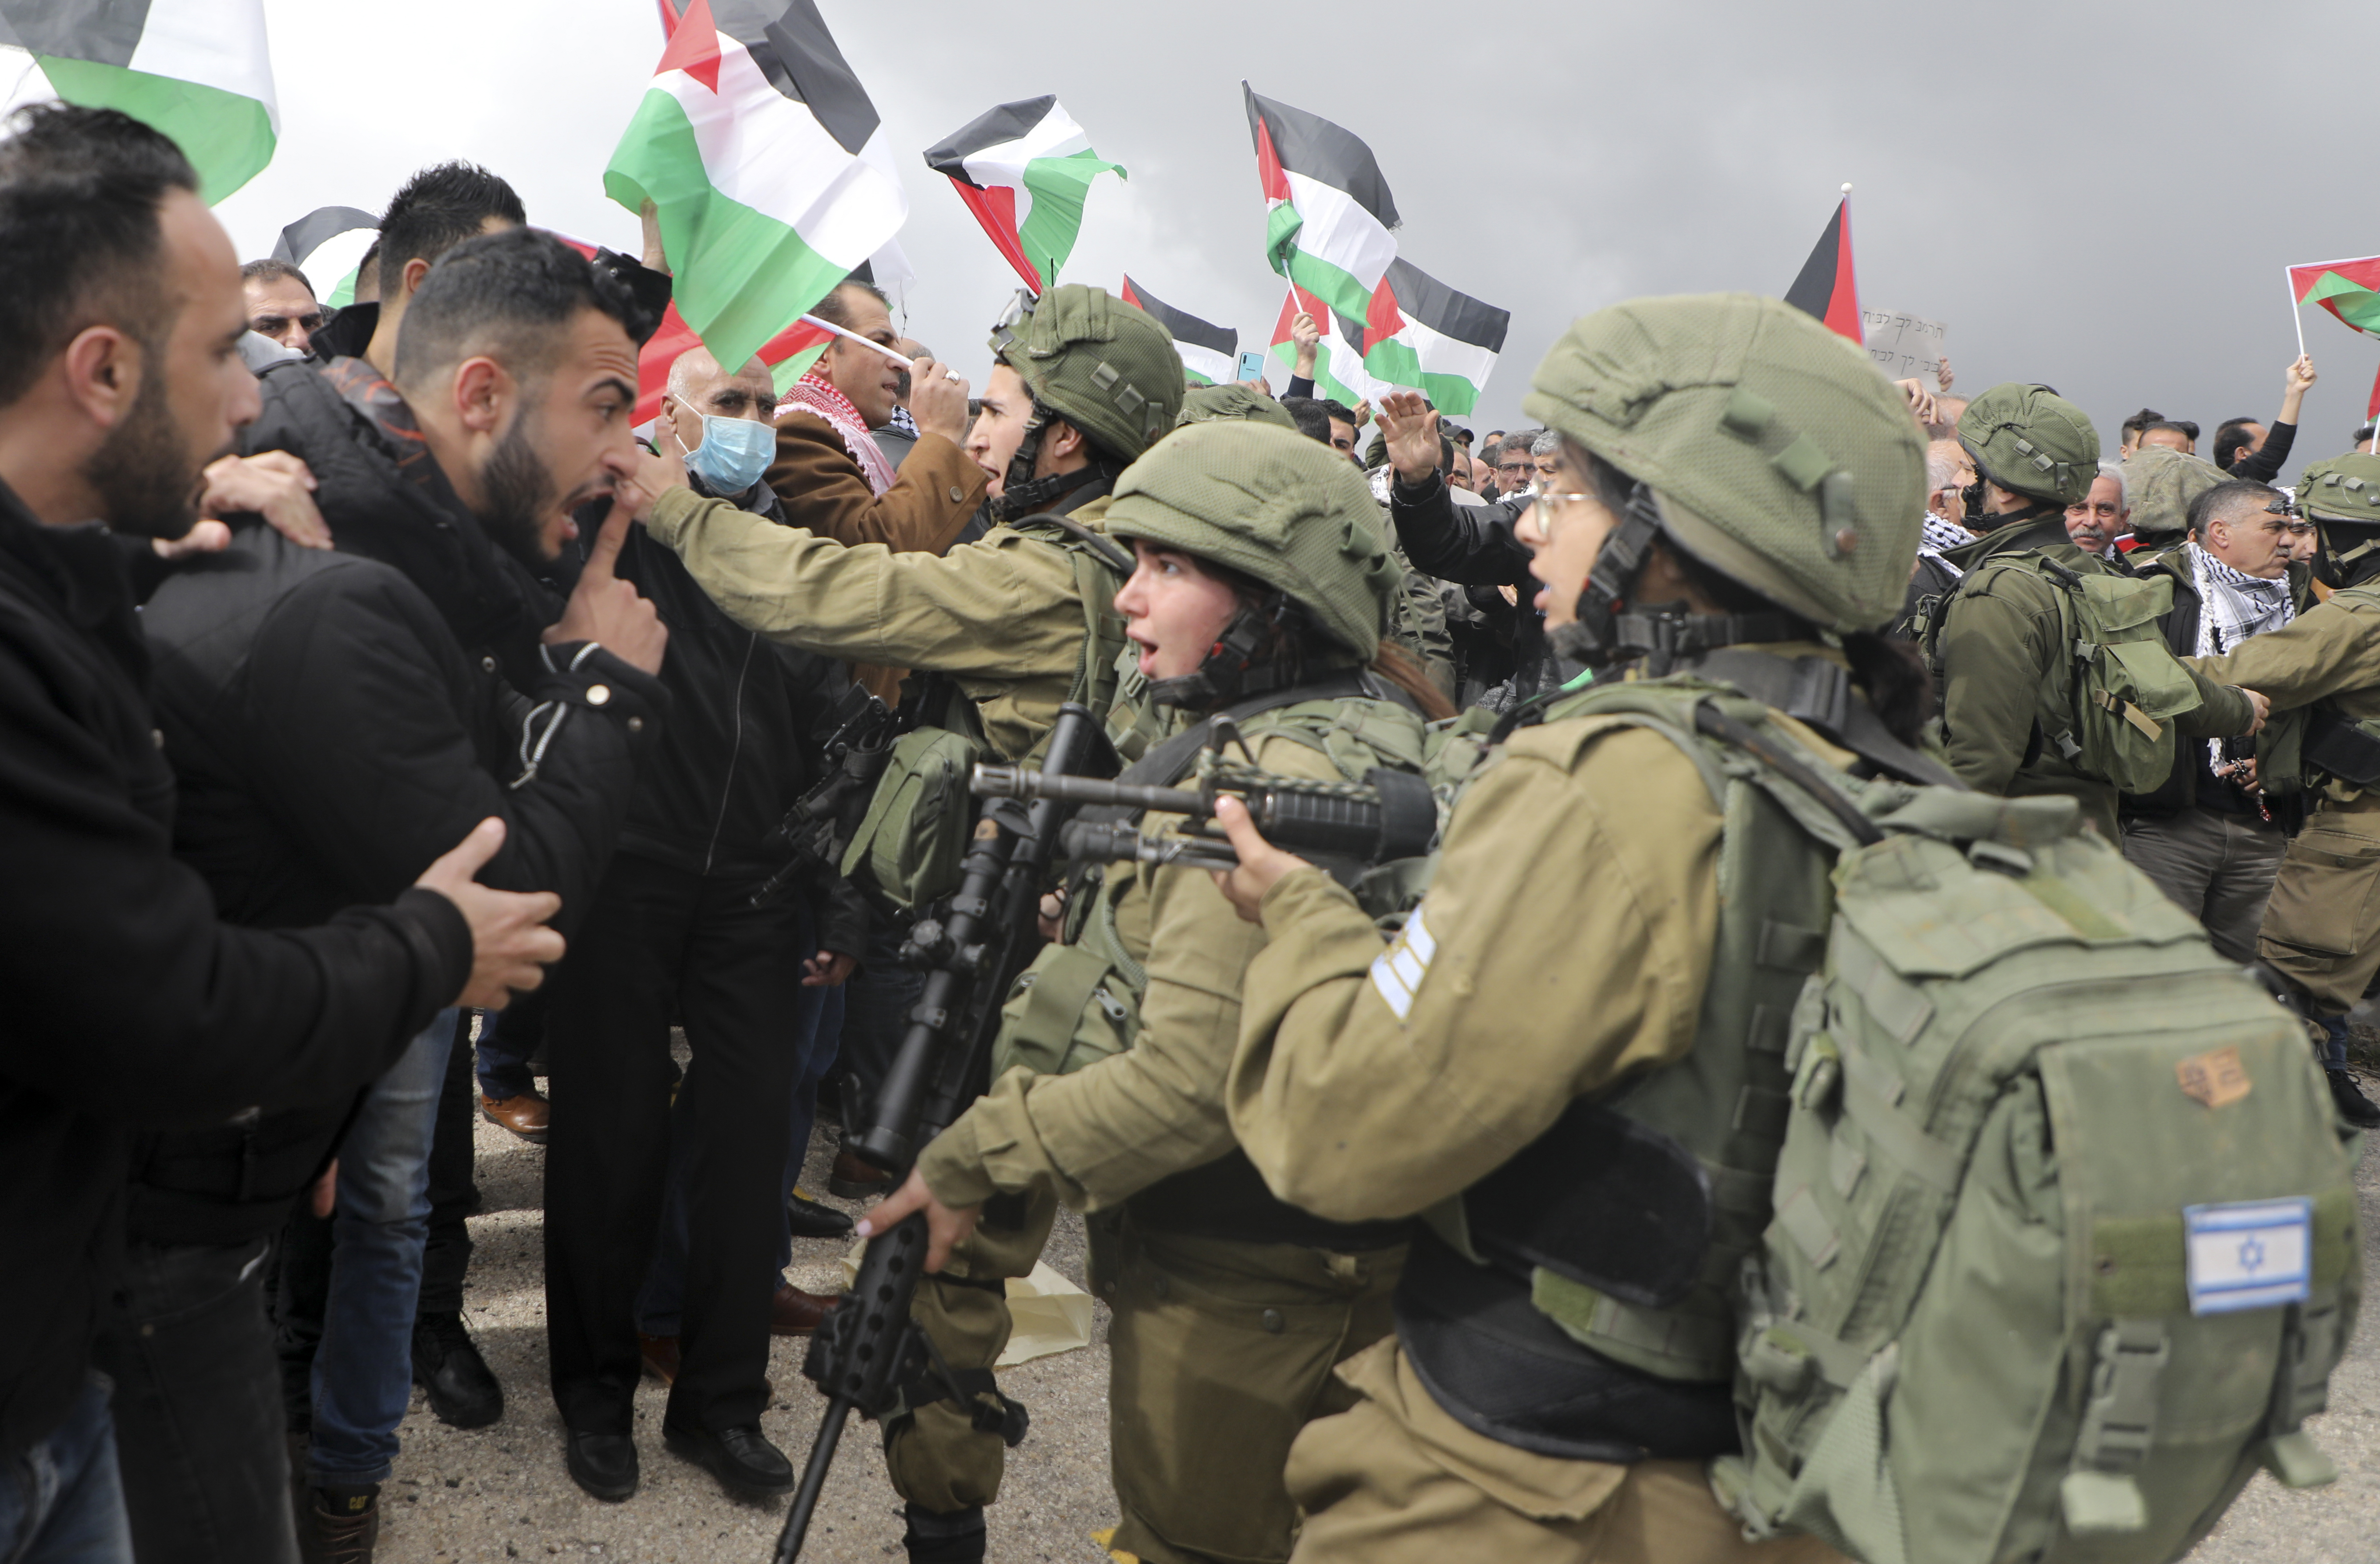 Palestinian protesters confront Israeli soldiers during a protest in the occupied West Bank on 29 January 2020 (AFP)